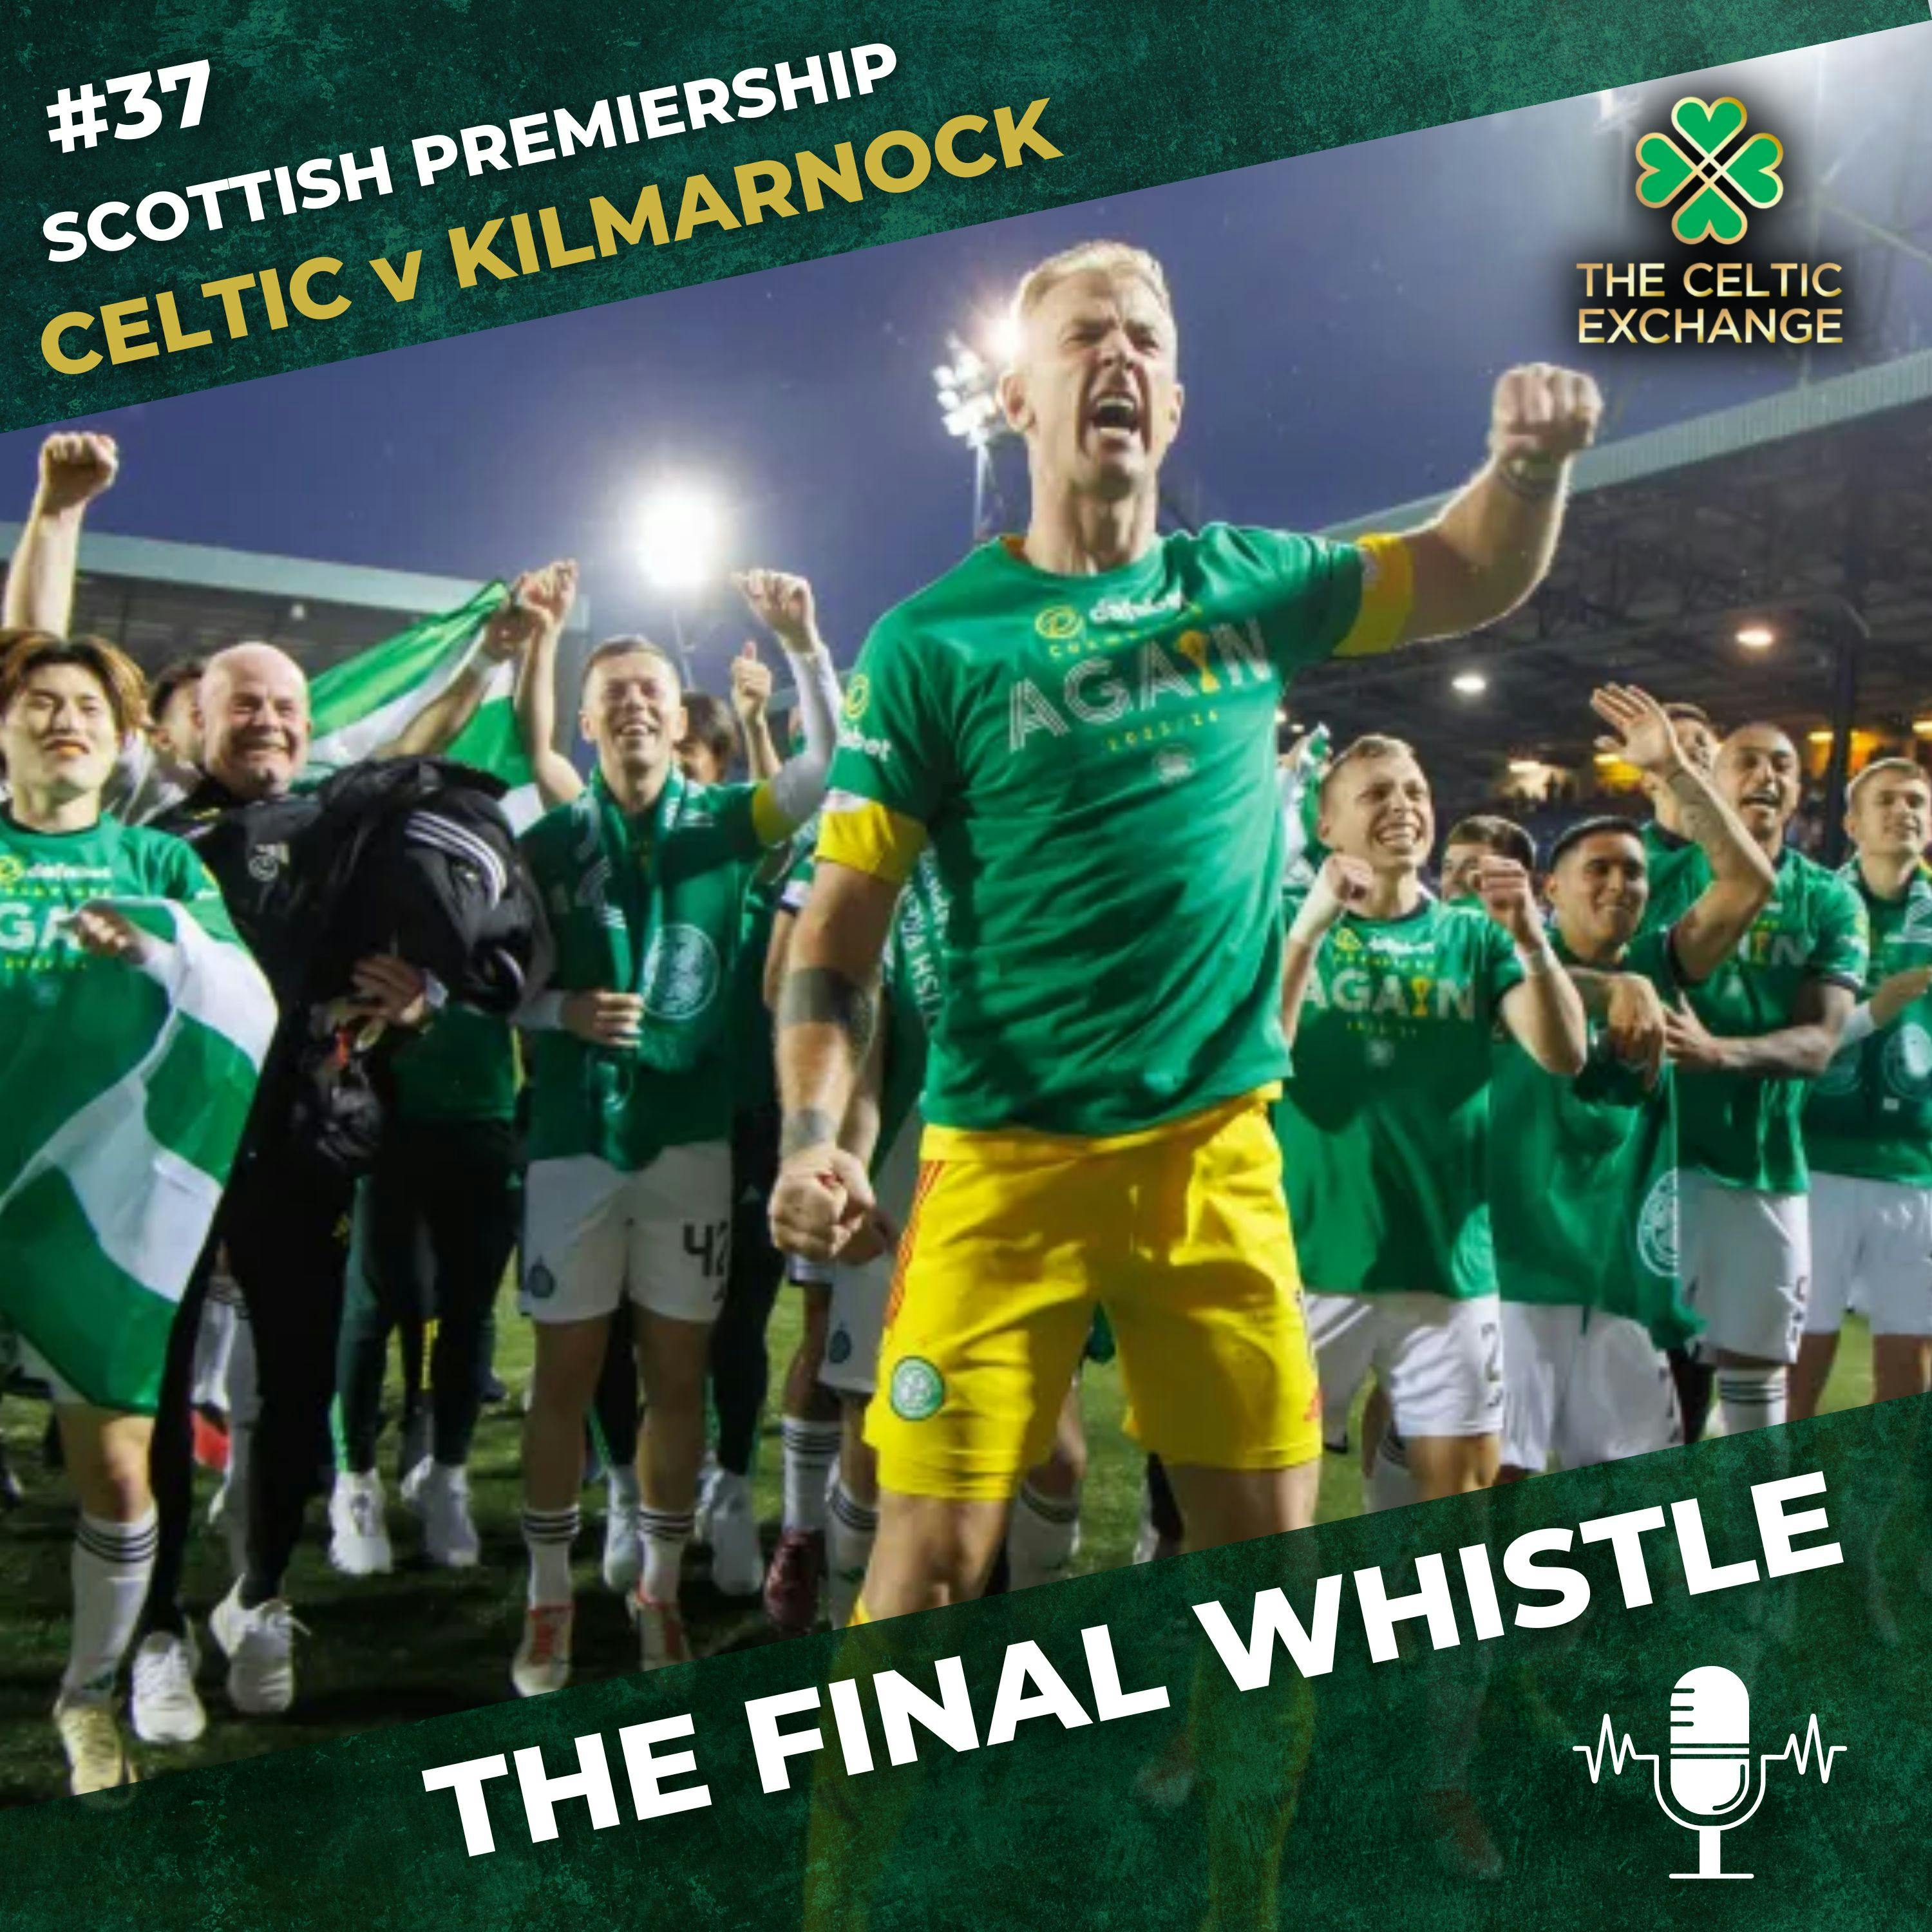 Final Whistle: Celtic Smash Through The Finishing Line On An Incredible Night For The Champions At Rugby Park